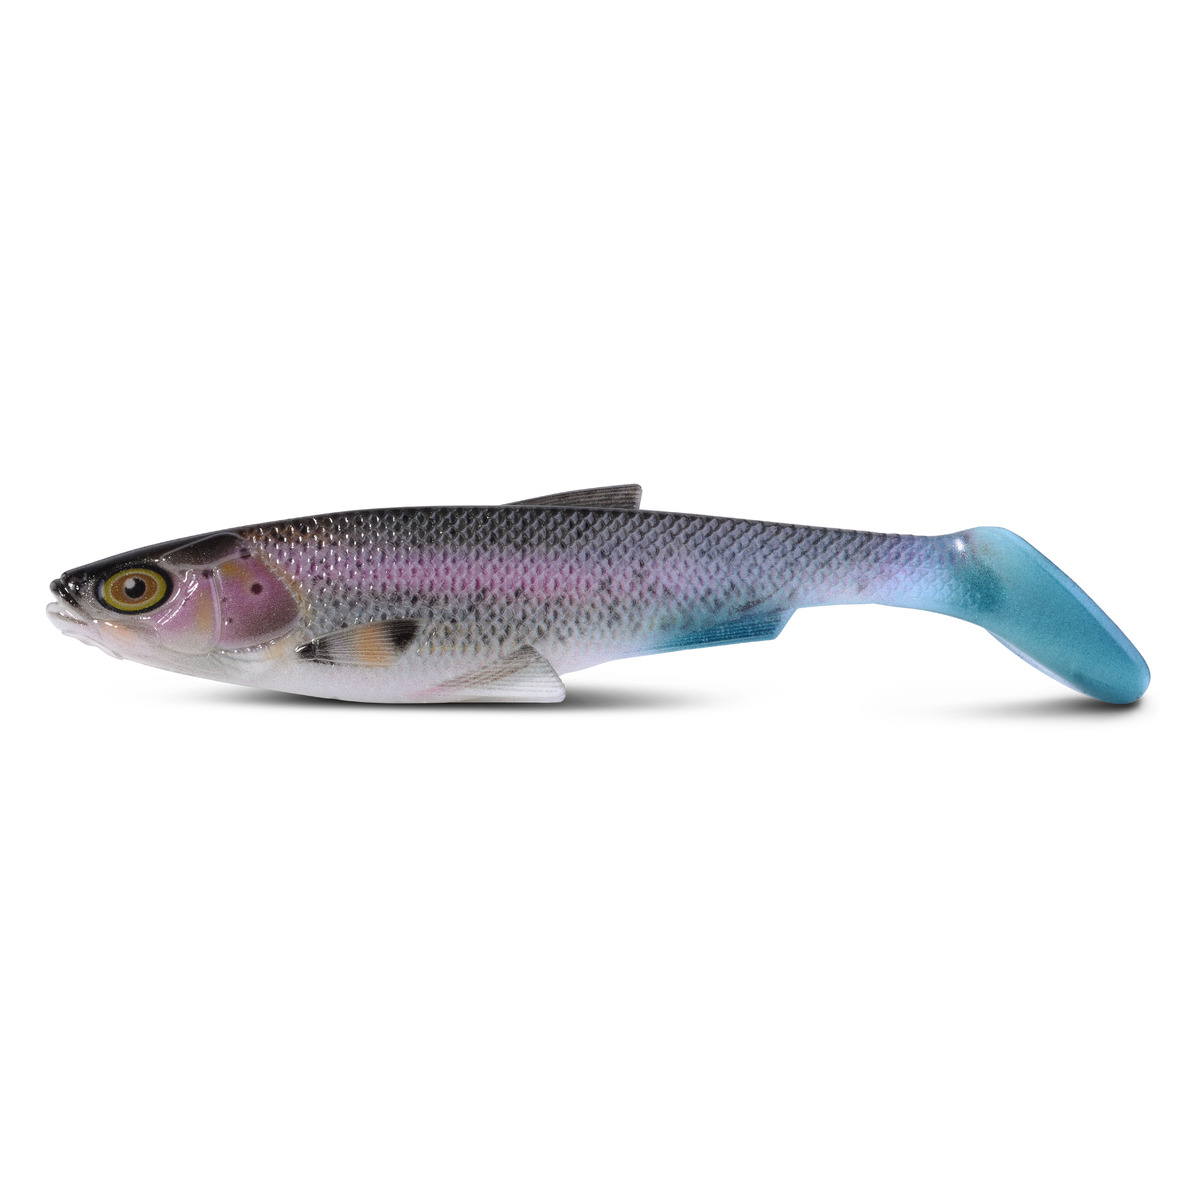 Iron Claw Belly Boy Ng Nature 15 Cm - Trucha arco iris